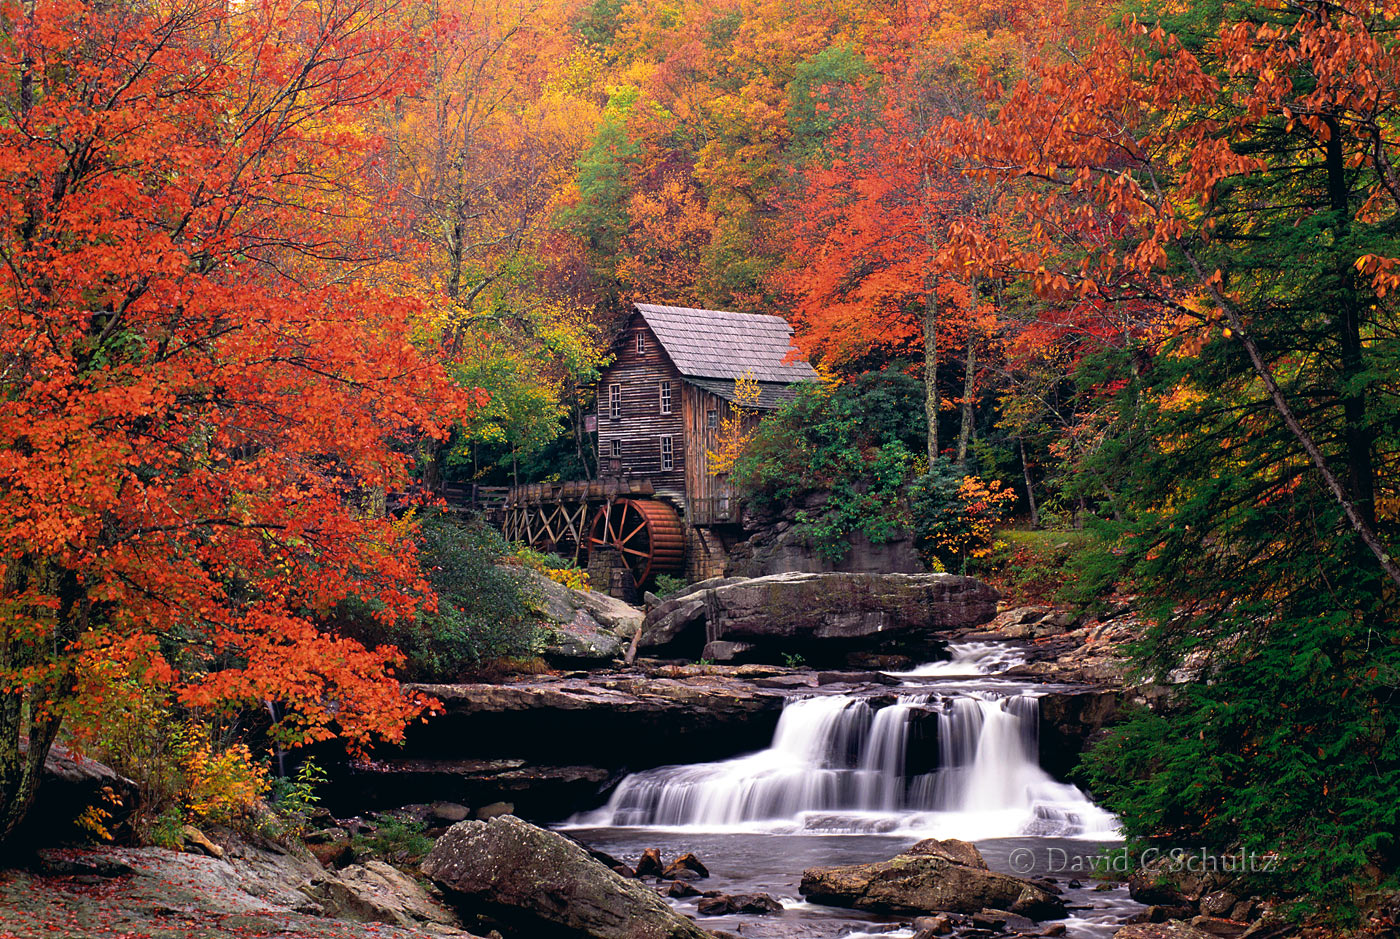 Glade Creek Grist Mill - Image #129-97